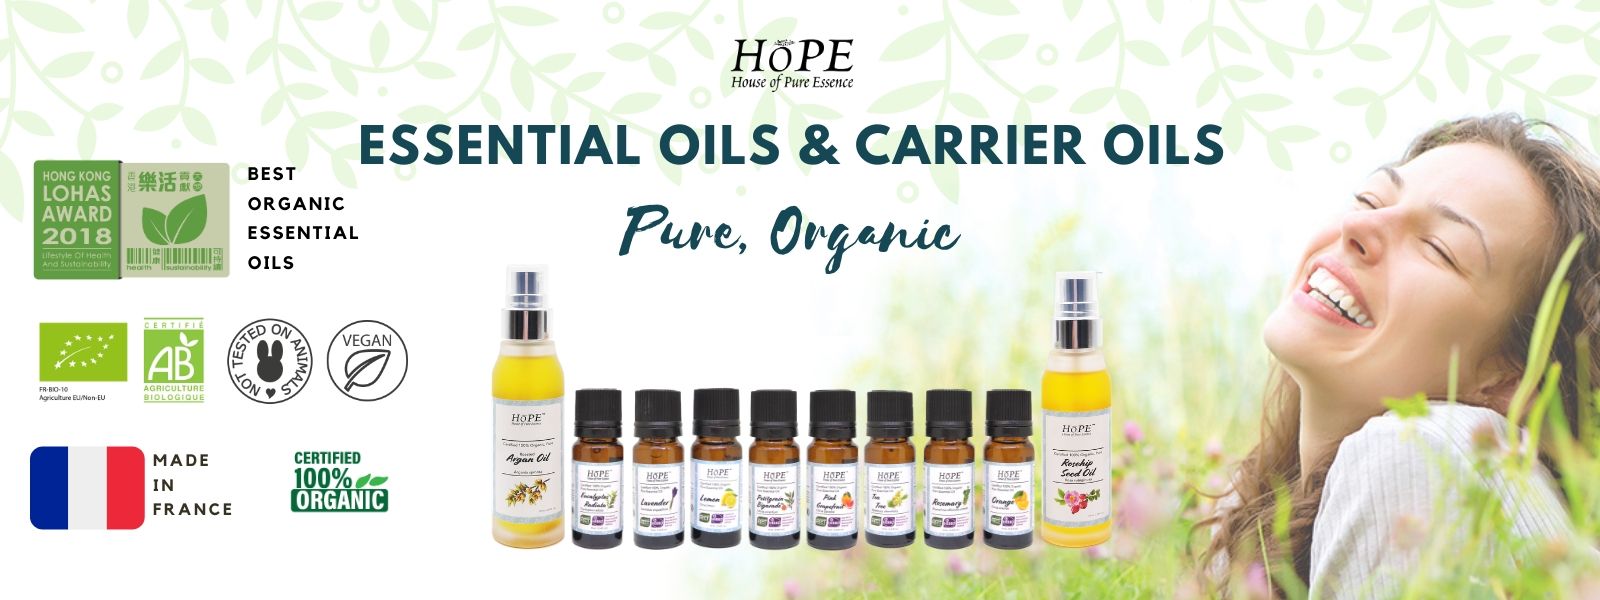 Essential Oils For Laundry, 100% Pure & Natural